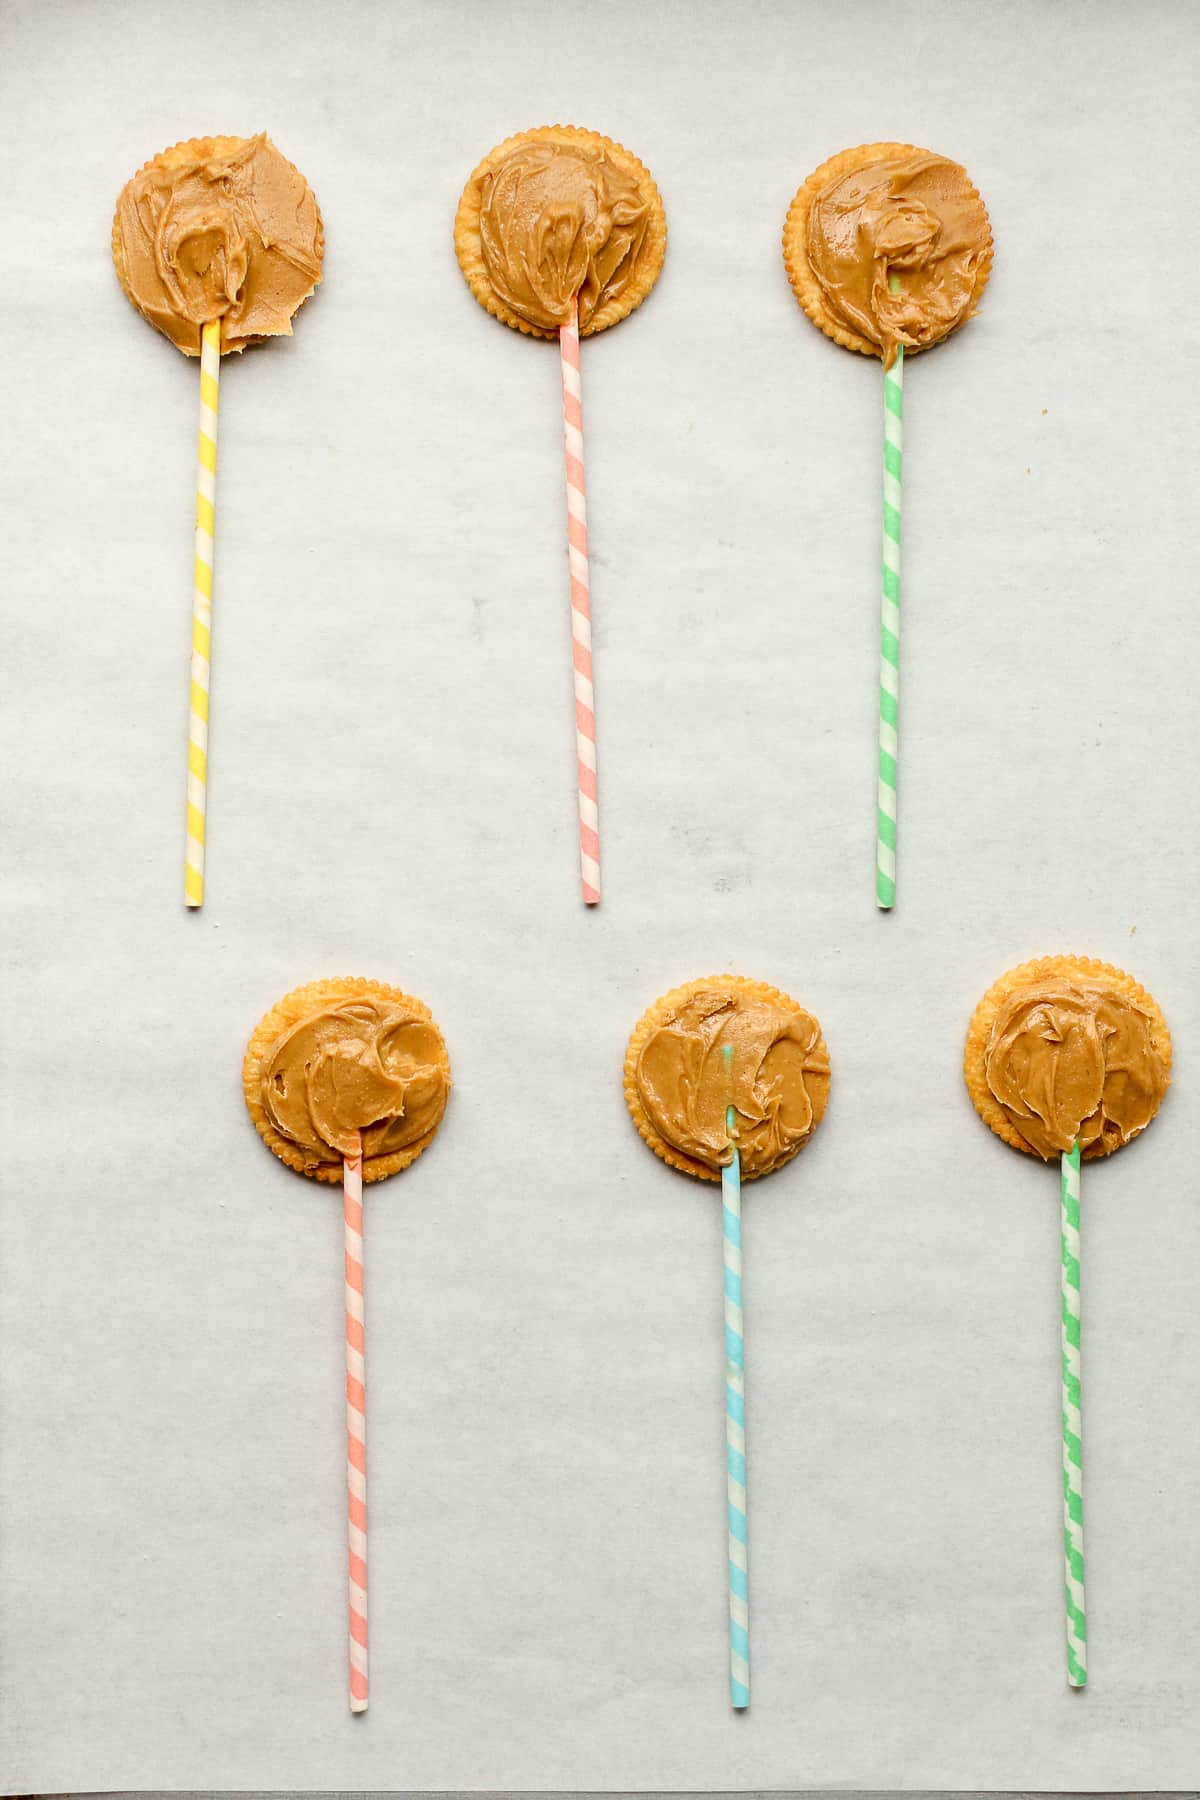 The ritz crackers with peanut butter and a lollipop stick on top.